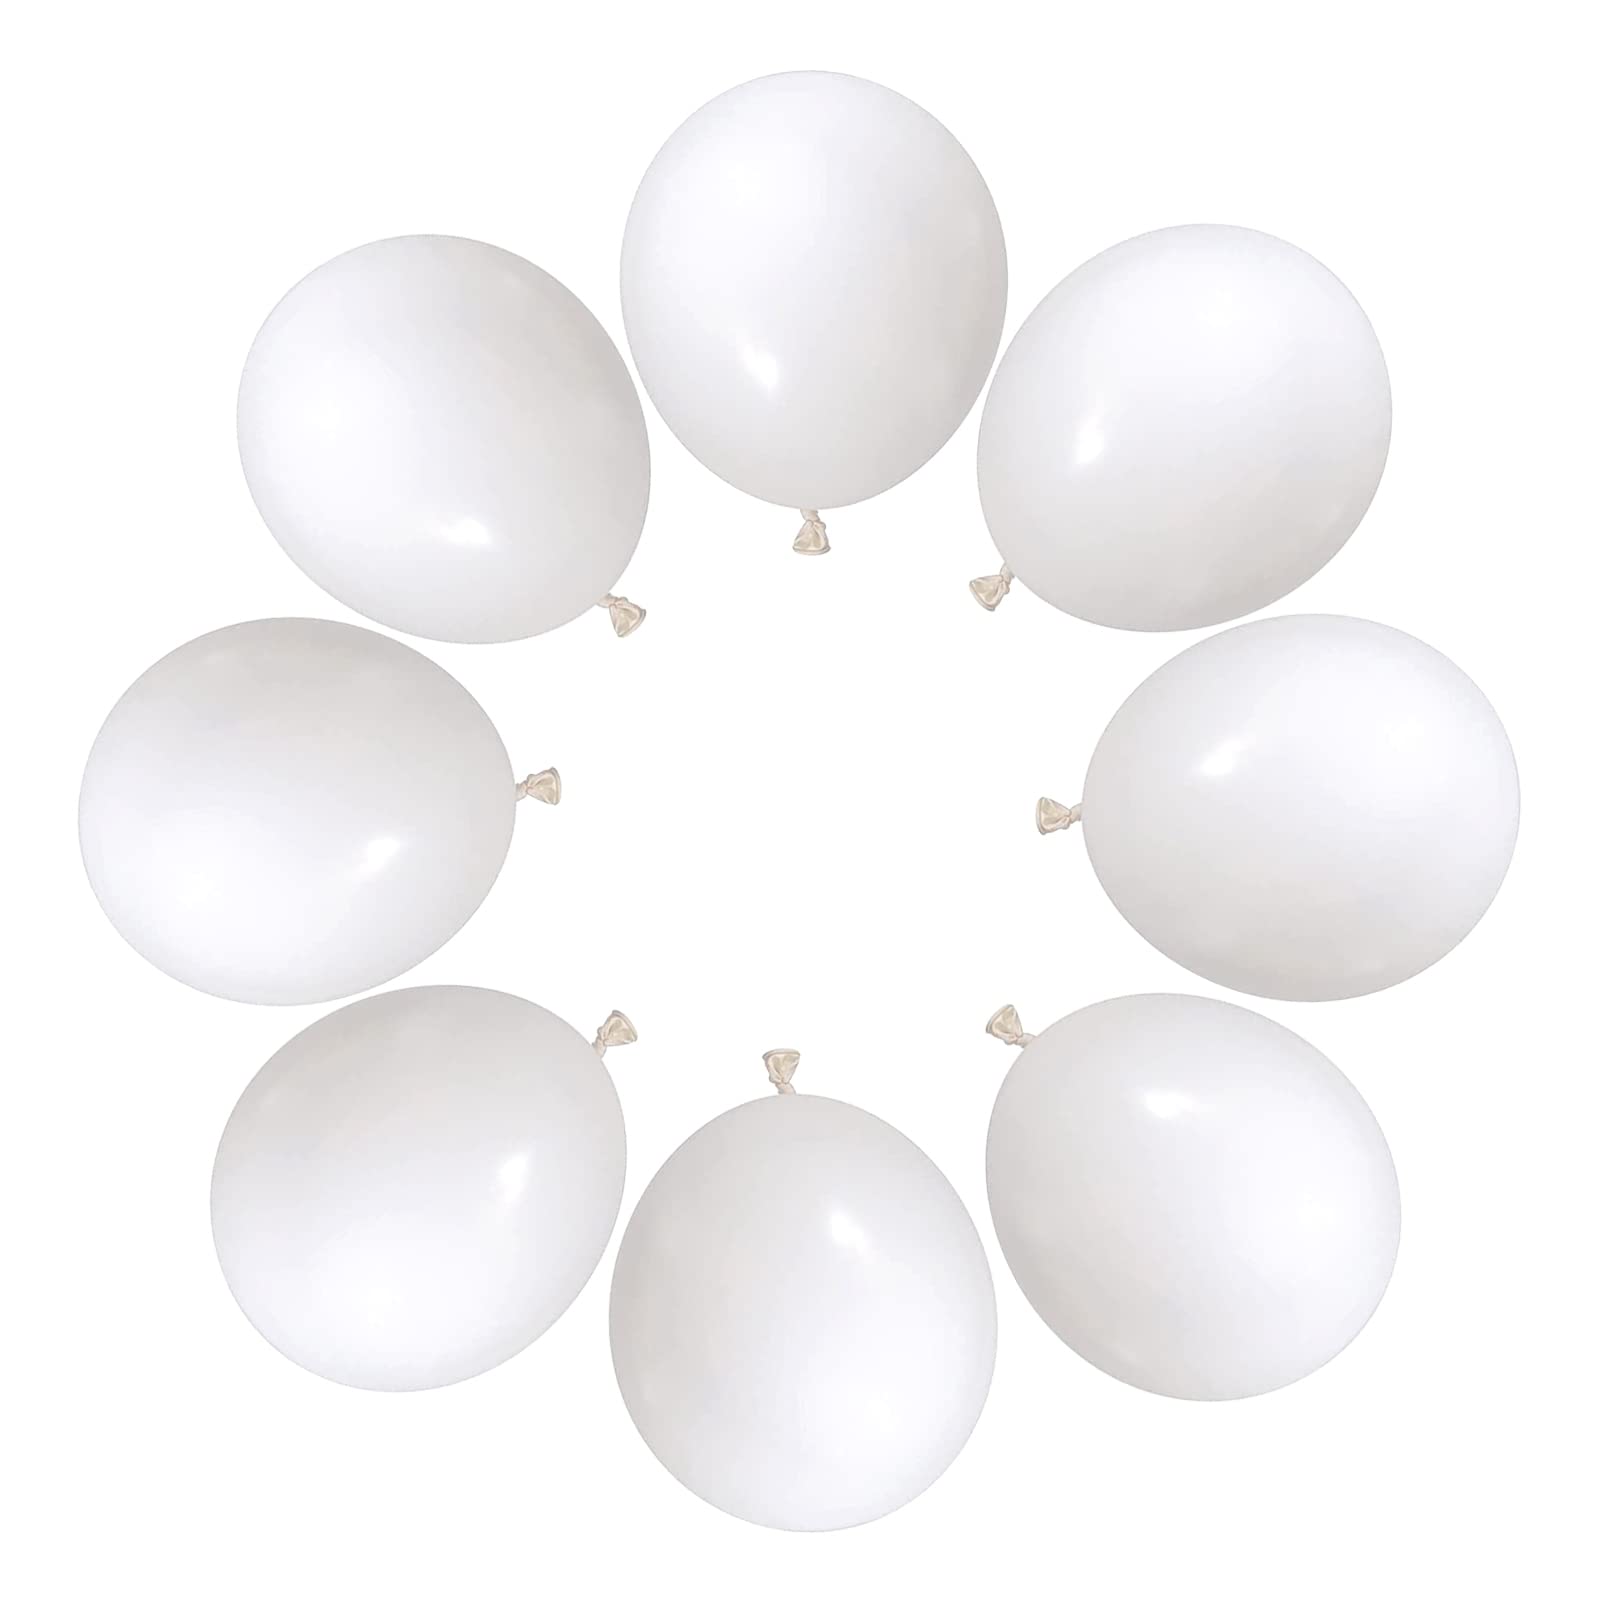 White Balloons Latex Party Balloons - 60 Pack 12 inch White Matte balloons Round Helium Balloons for White Theme Wedding Birthday Party Backdrop Decorations Holiday Celebration Graduation Decorations